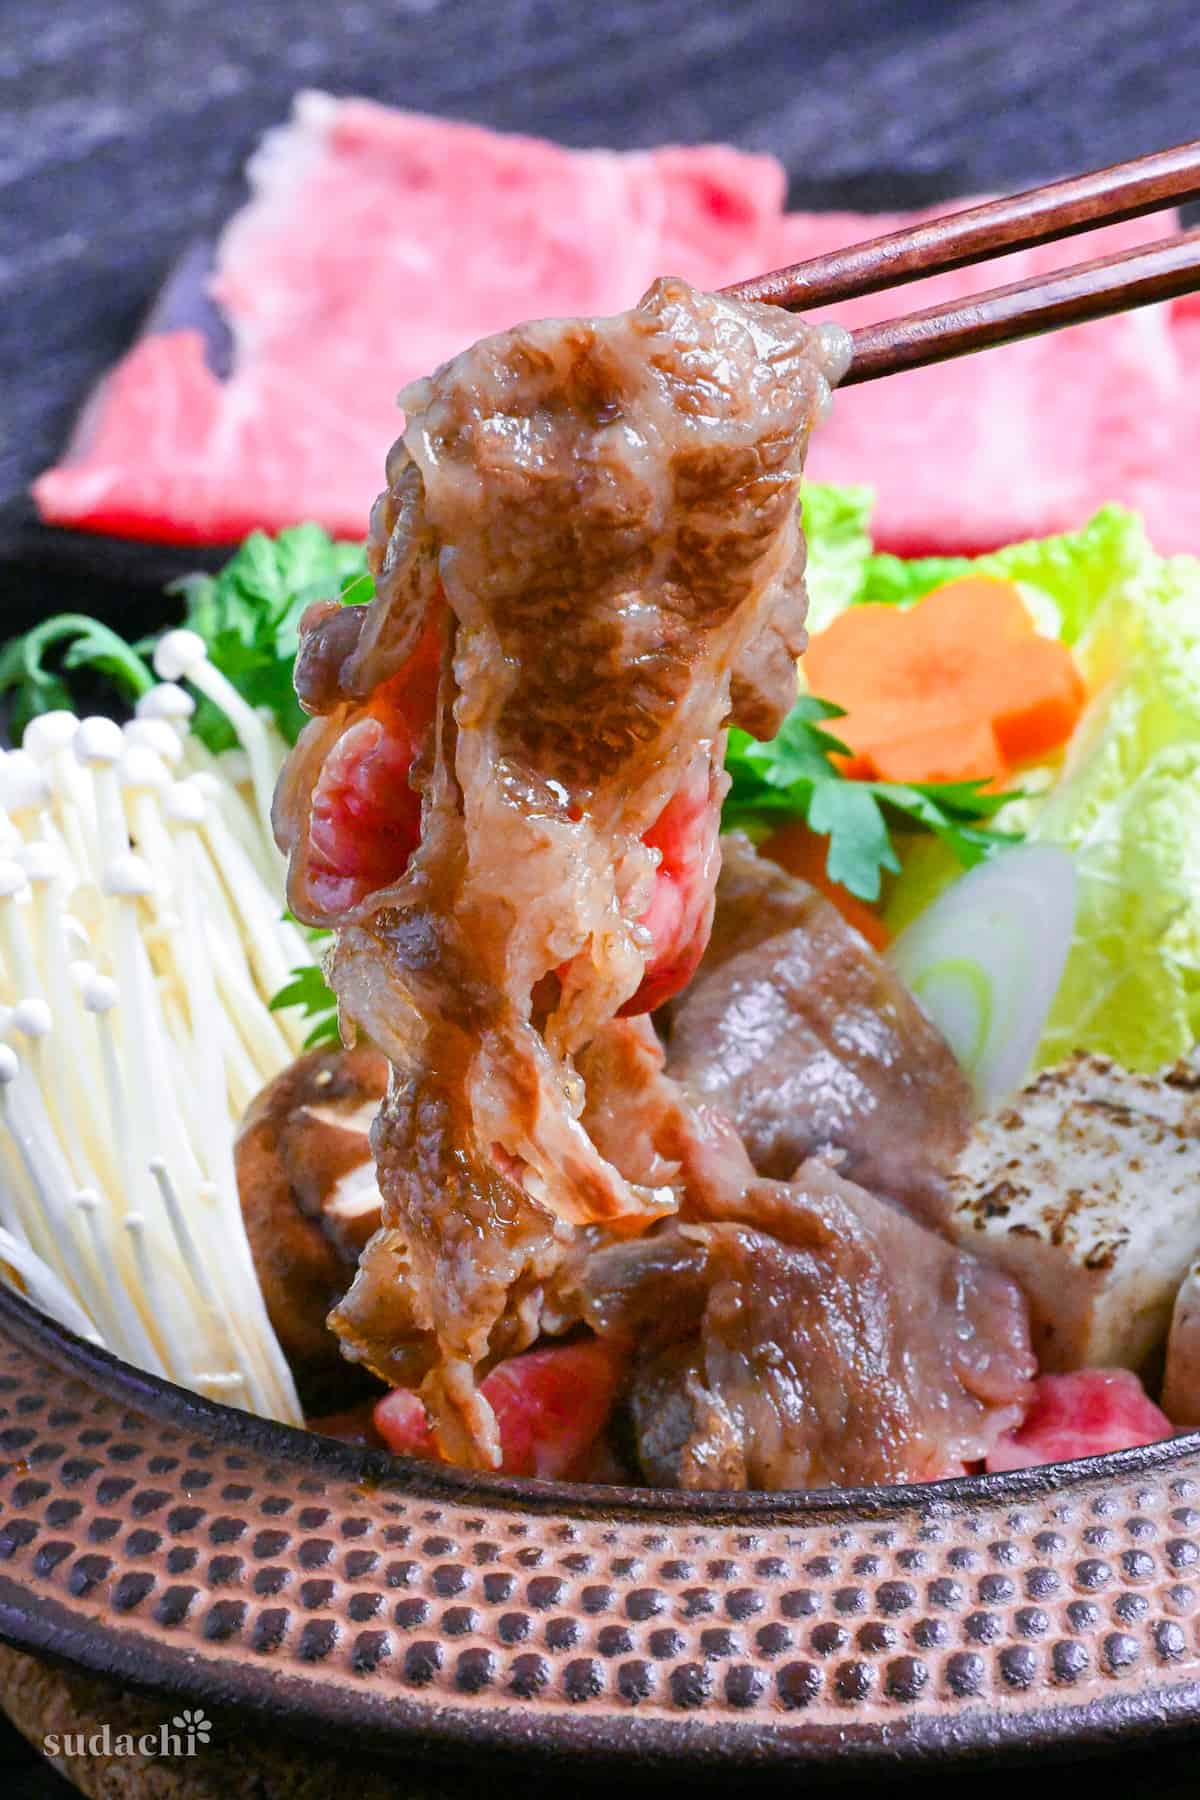 Traditional Japanese beef sukiyaki made with homemade sauce, thinly sliced wagyu beef, grilled tofu, shiitake mushrooms, enoki, carrots, napa cabbage, Japanese leeks and napa cabbage in a cast iron pot